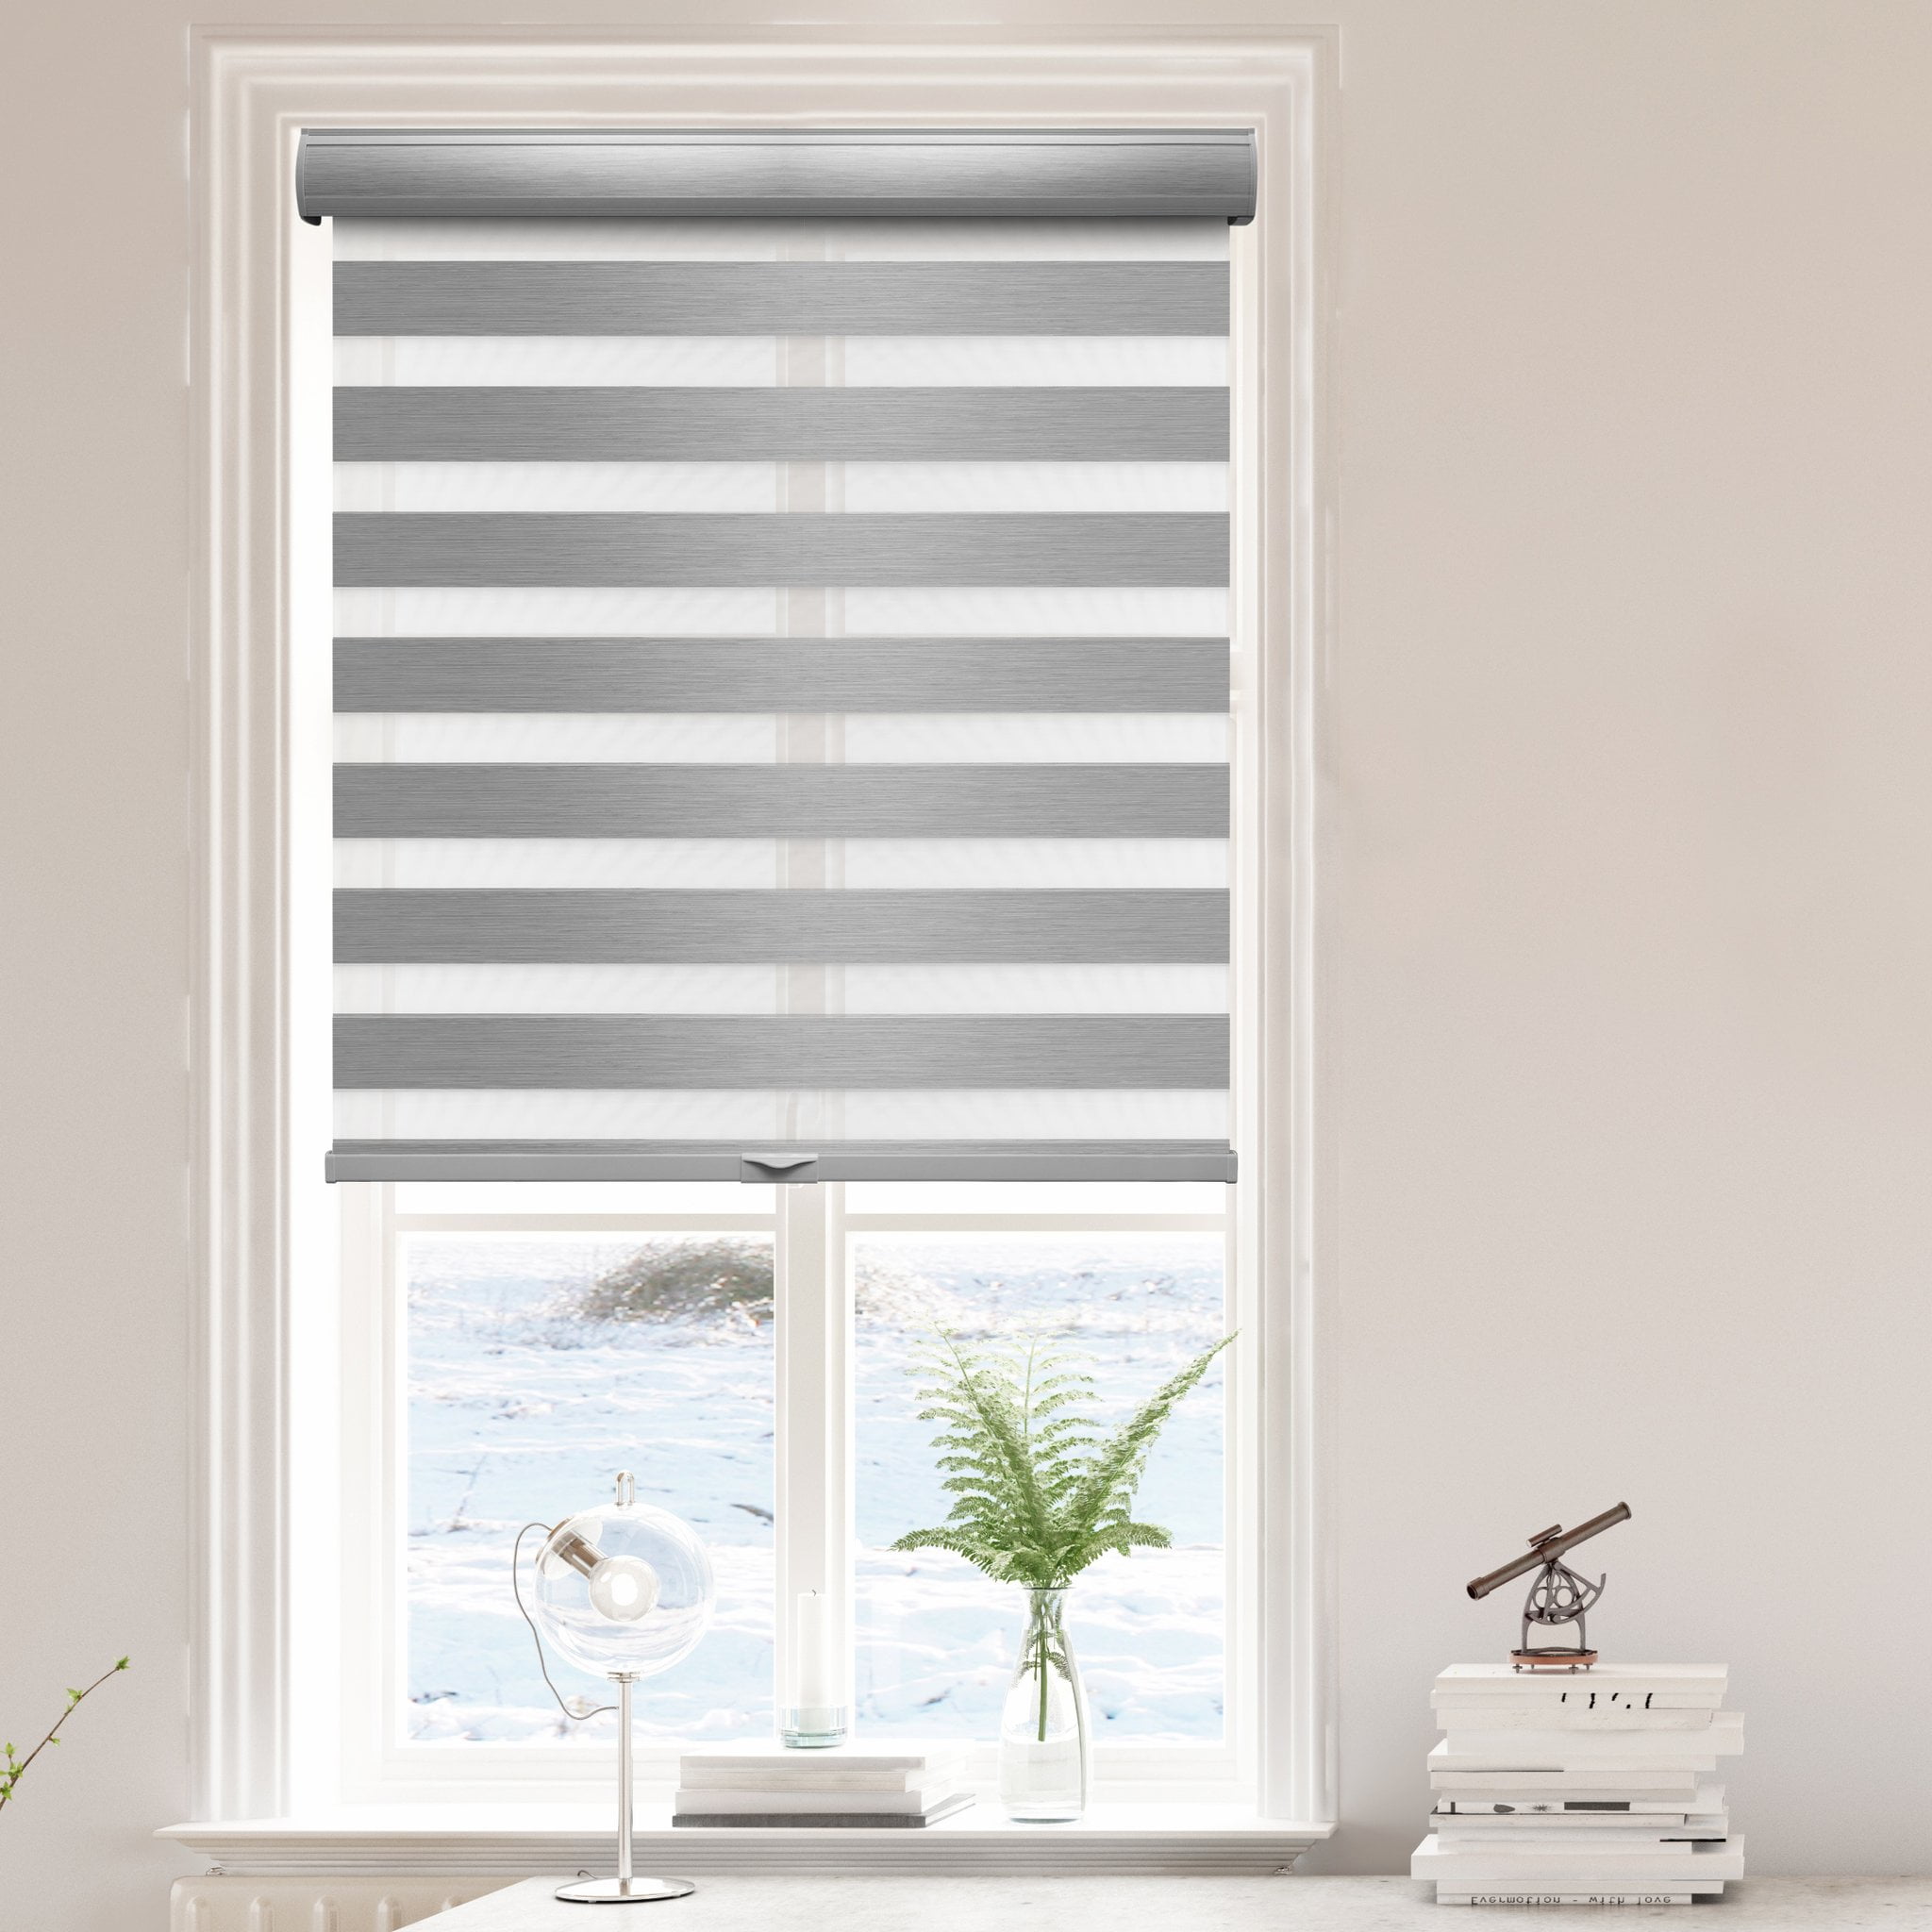 72"x72" Cordless Blackout Roller Shades Free-Stop Dual Layer Zebra Blinds 